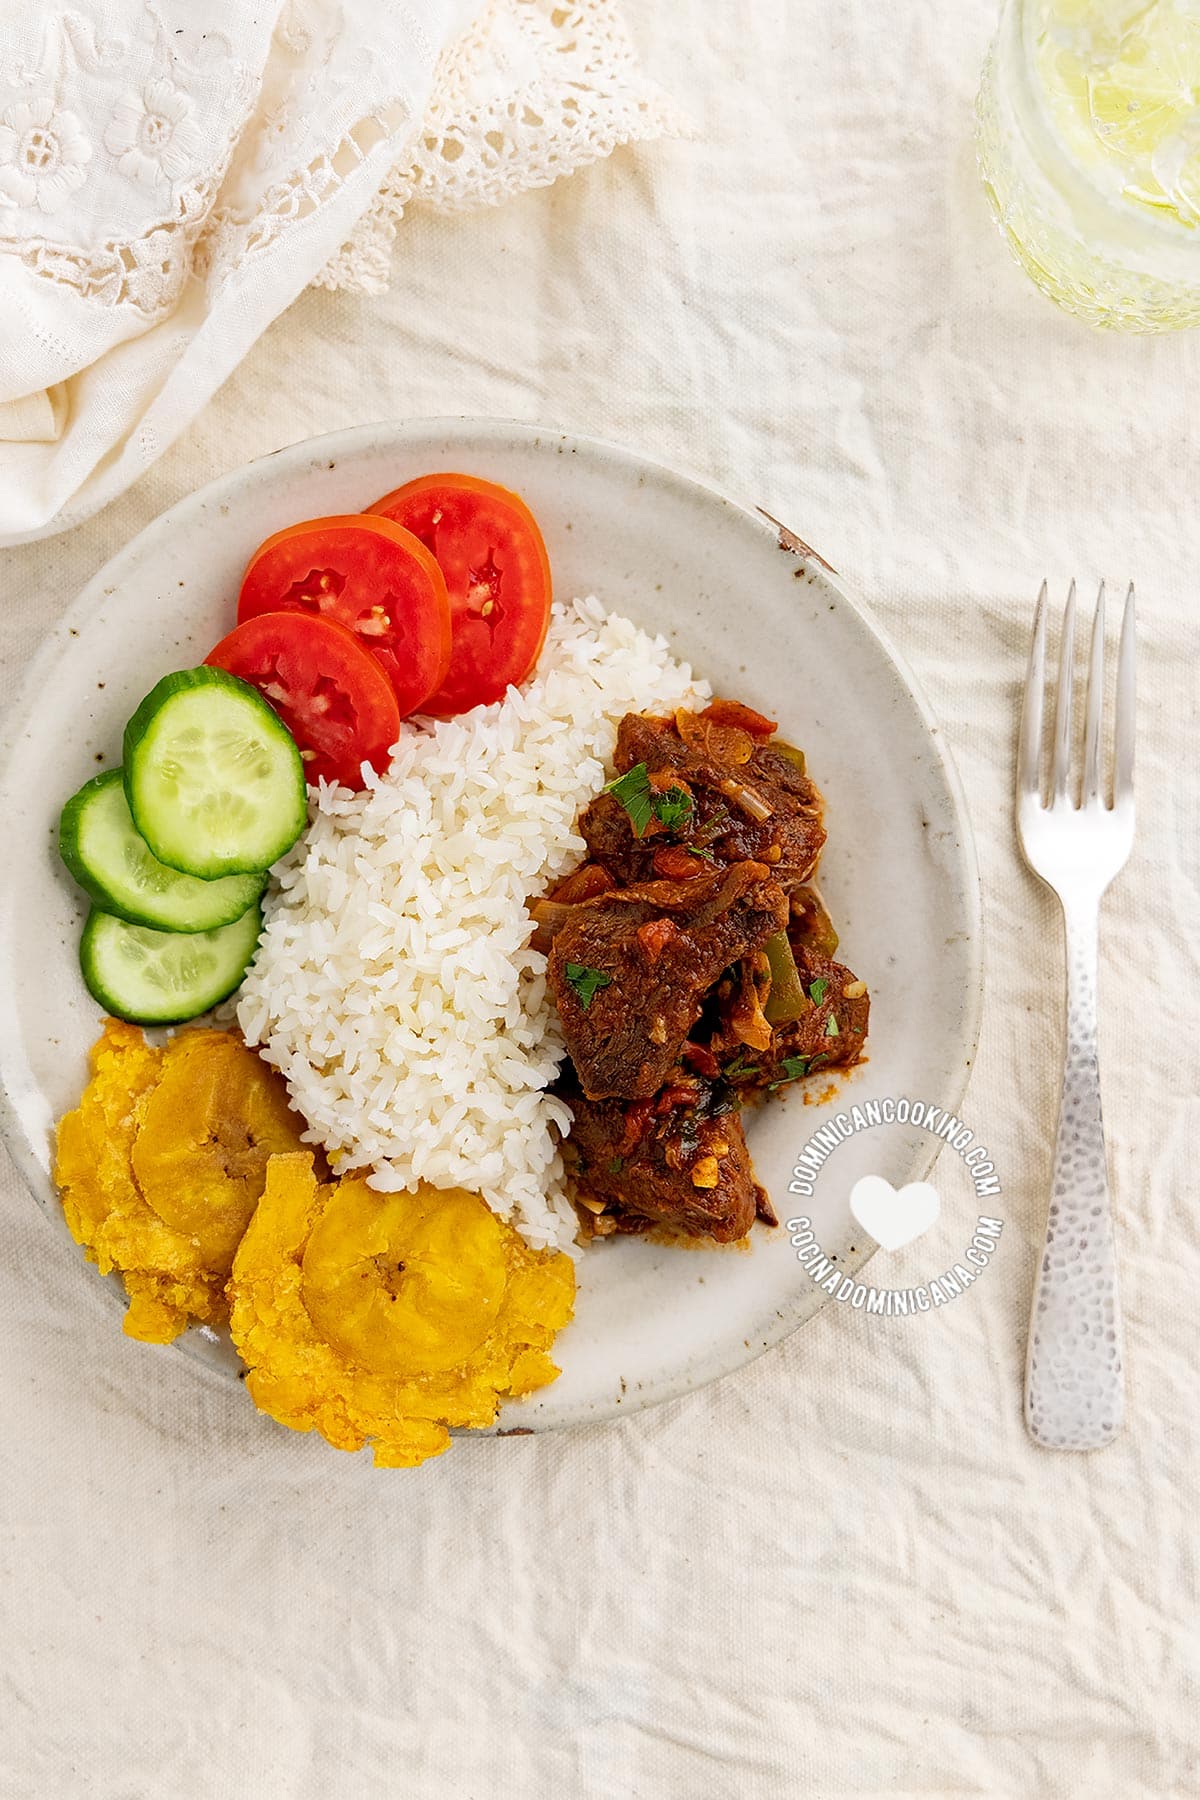 Carne guisada served with to rice, tostones, and salad.